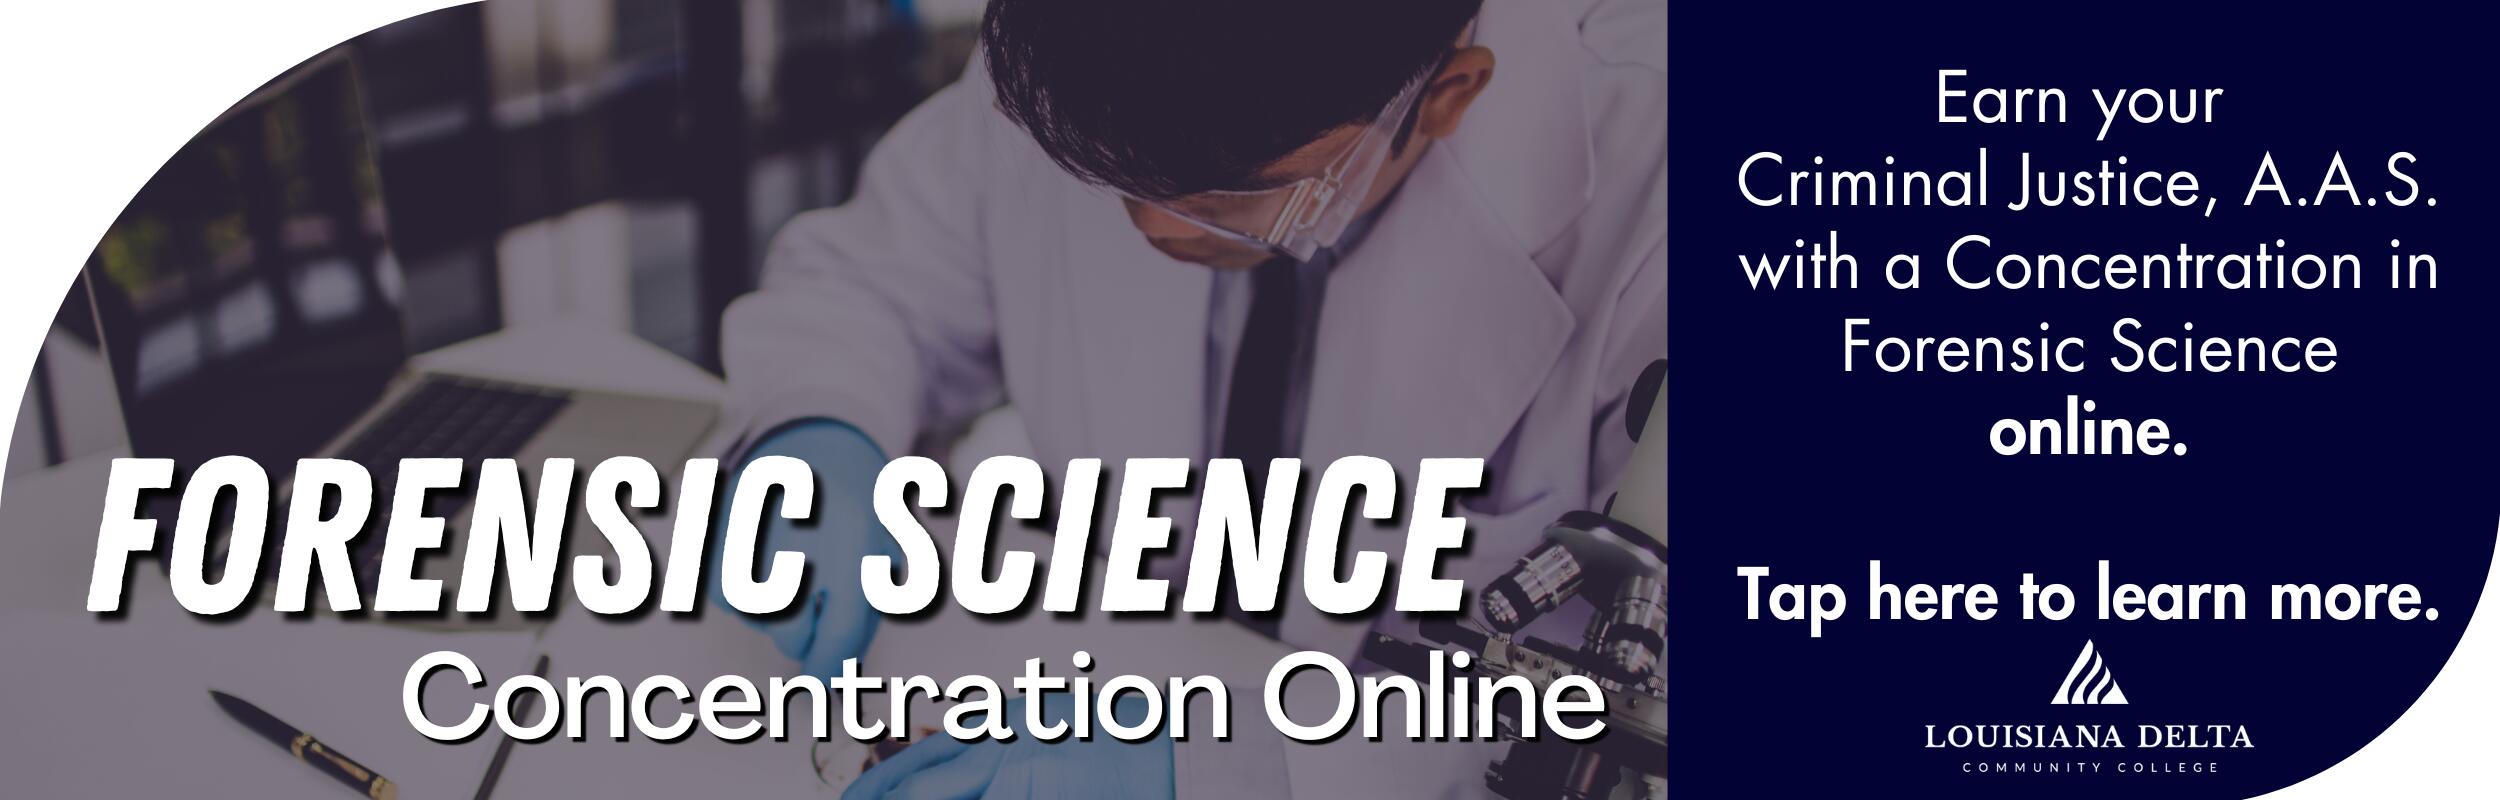 Forensic Science concentration online. Earn your Criminal Justice, A.A.S. with a Concentration in Forensic Science online. Tap here to learn more.